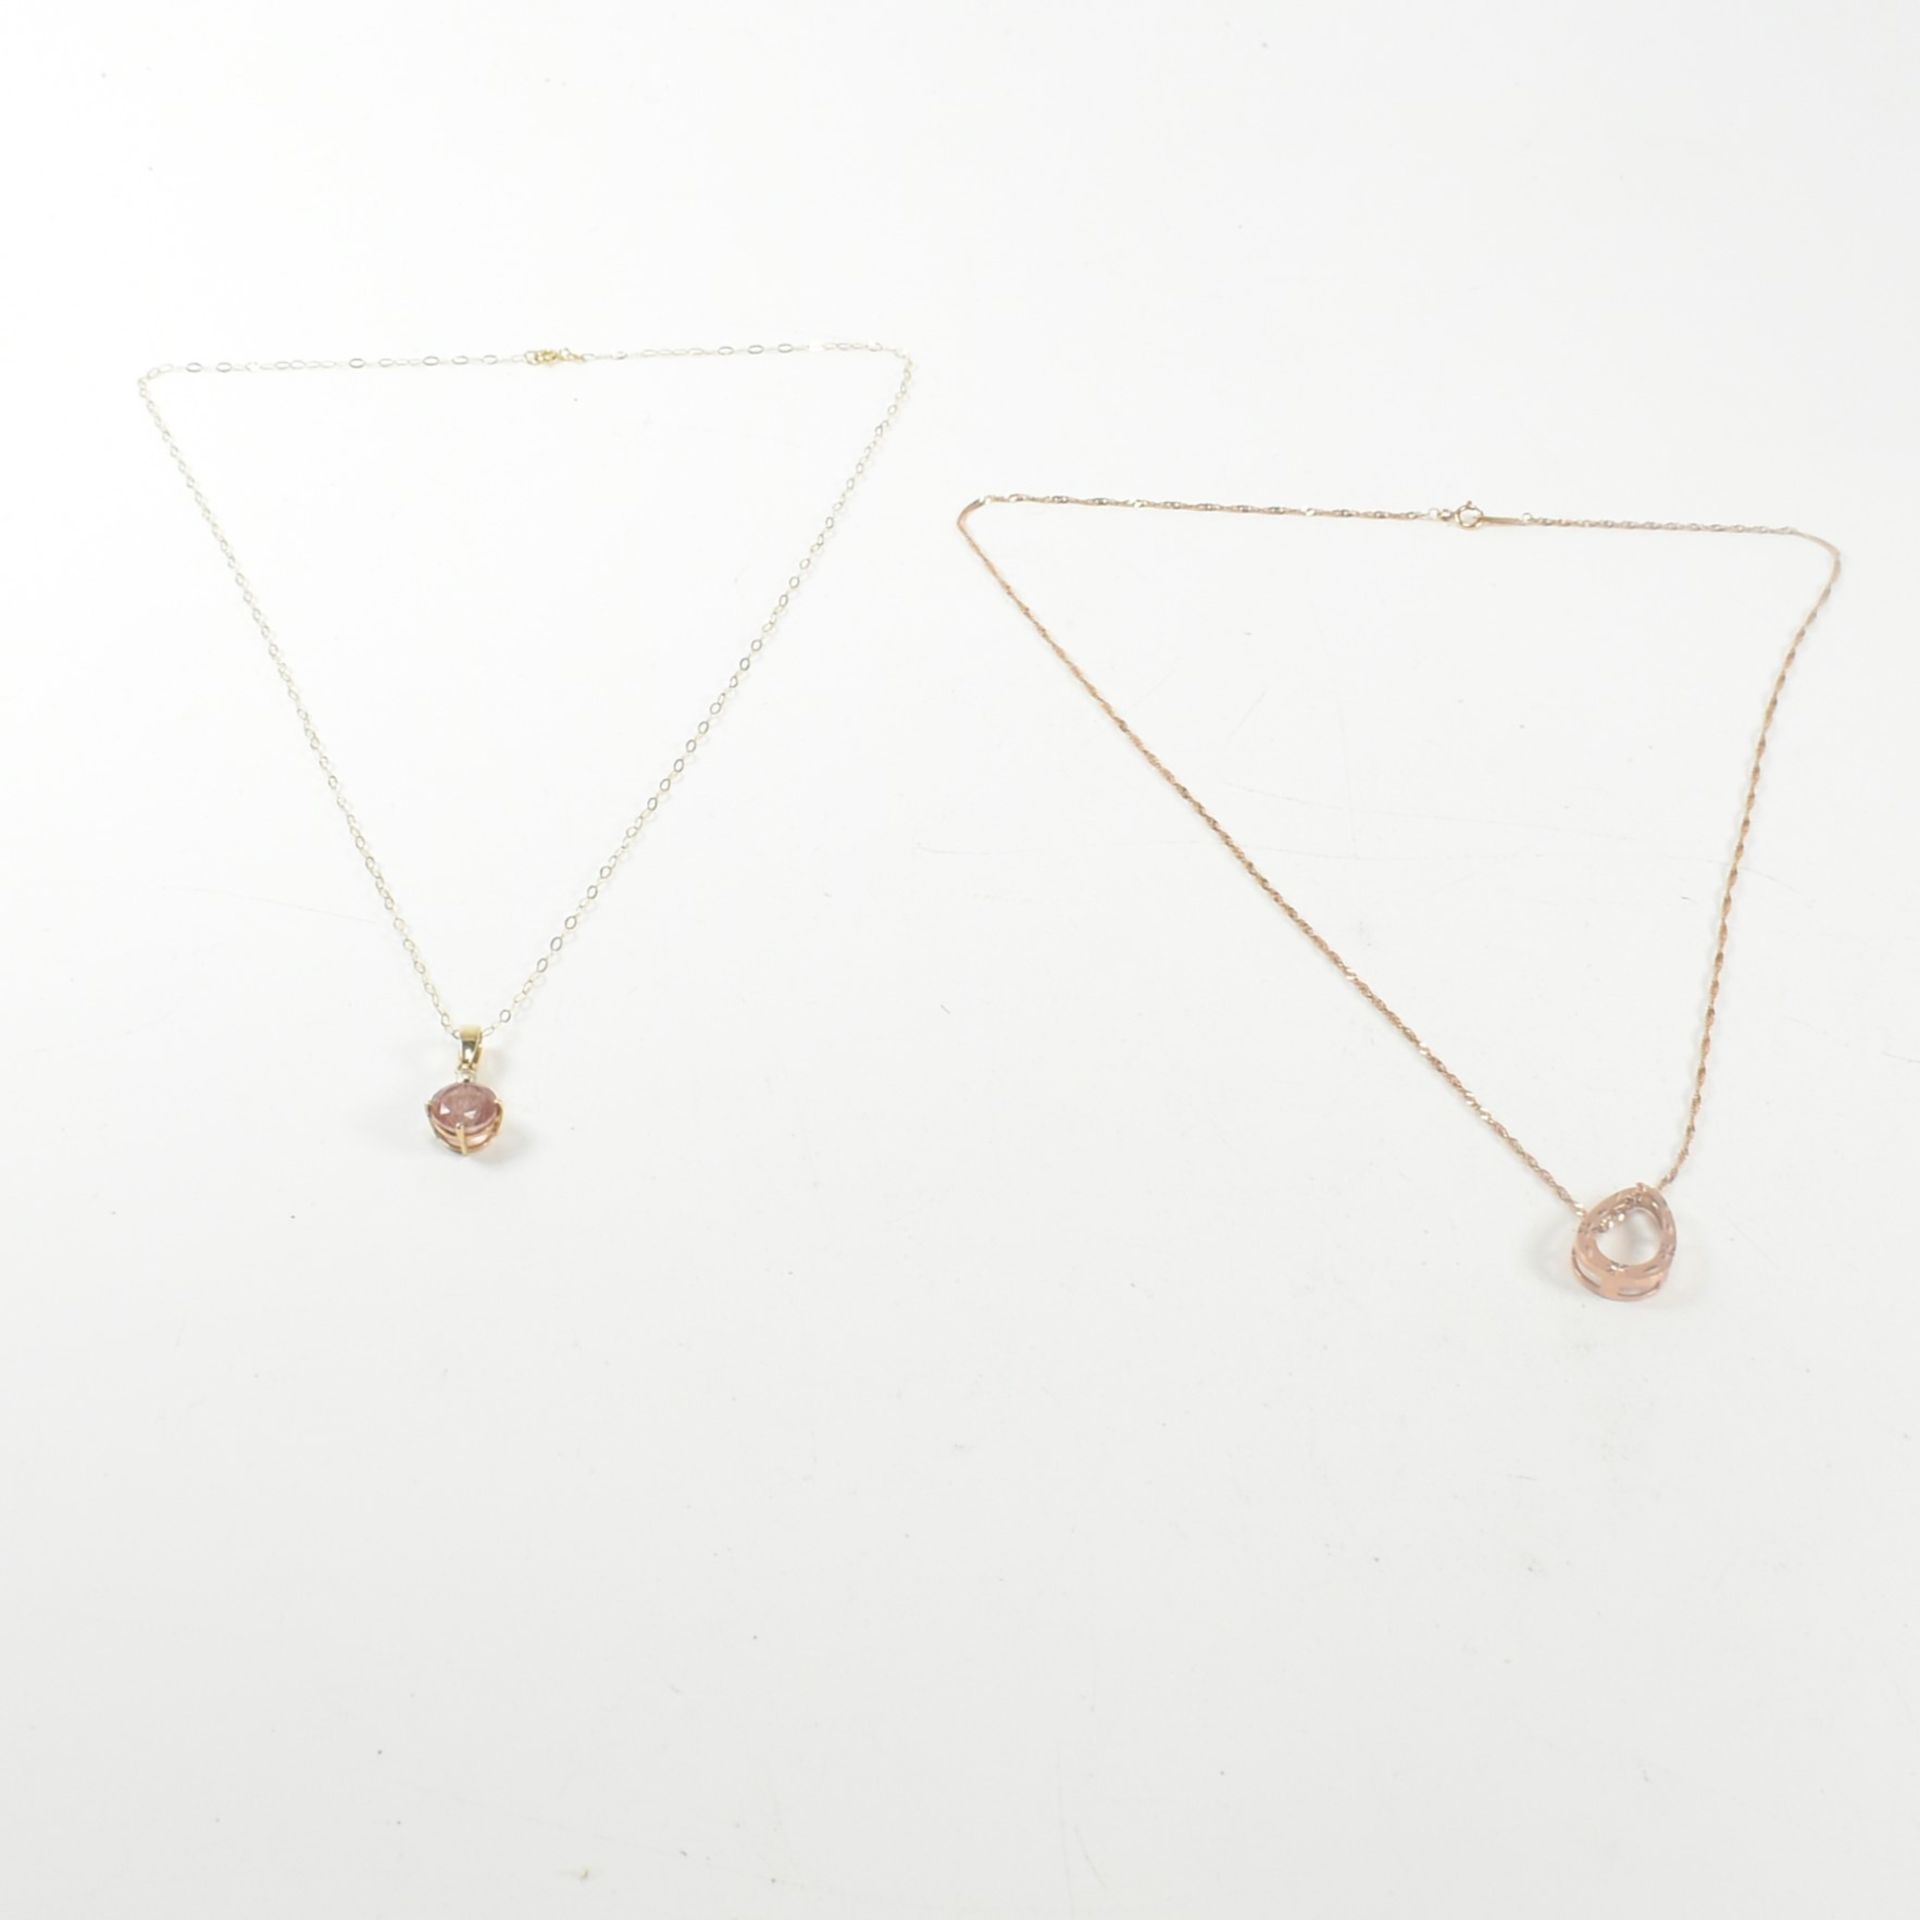 9CT ROSE GOLD PENDANT NECKLACE & 9CT YELLOW GOLD & GEM SET PENDANT NECKLACE - Image 2 of 6